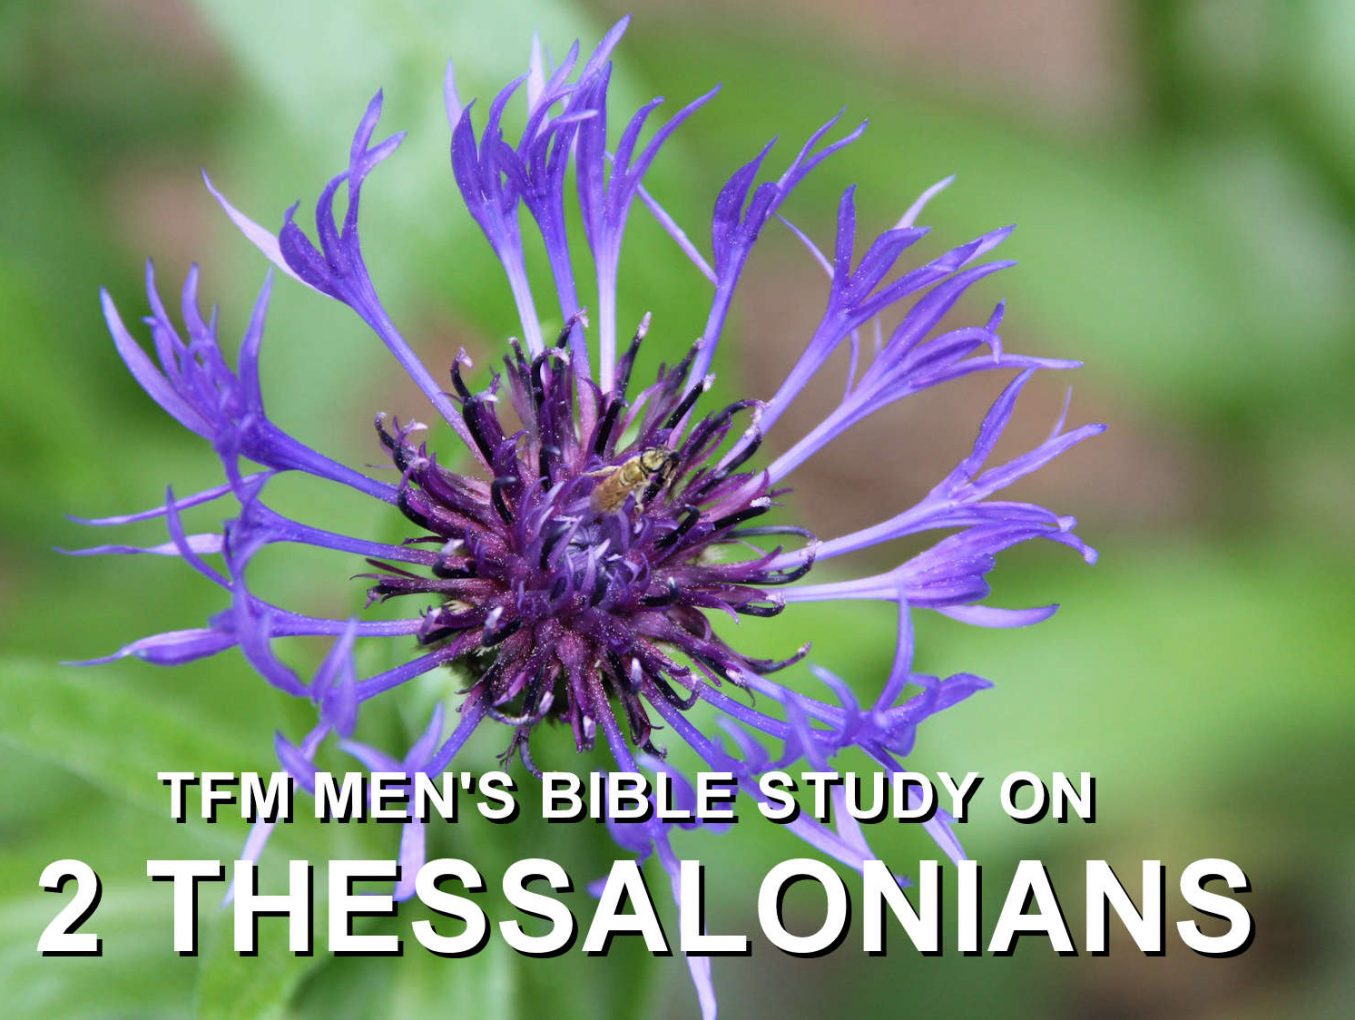 Men's Bible Study on 2 THESSALONIANS (2014-07-08 to 2014-07-15)